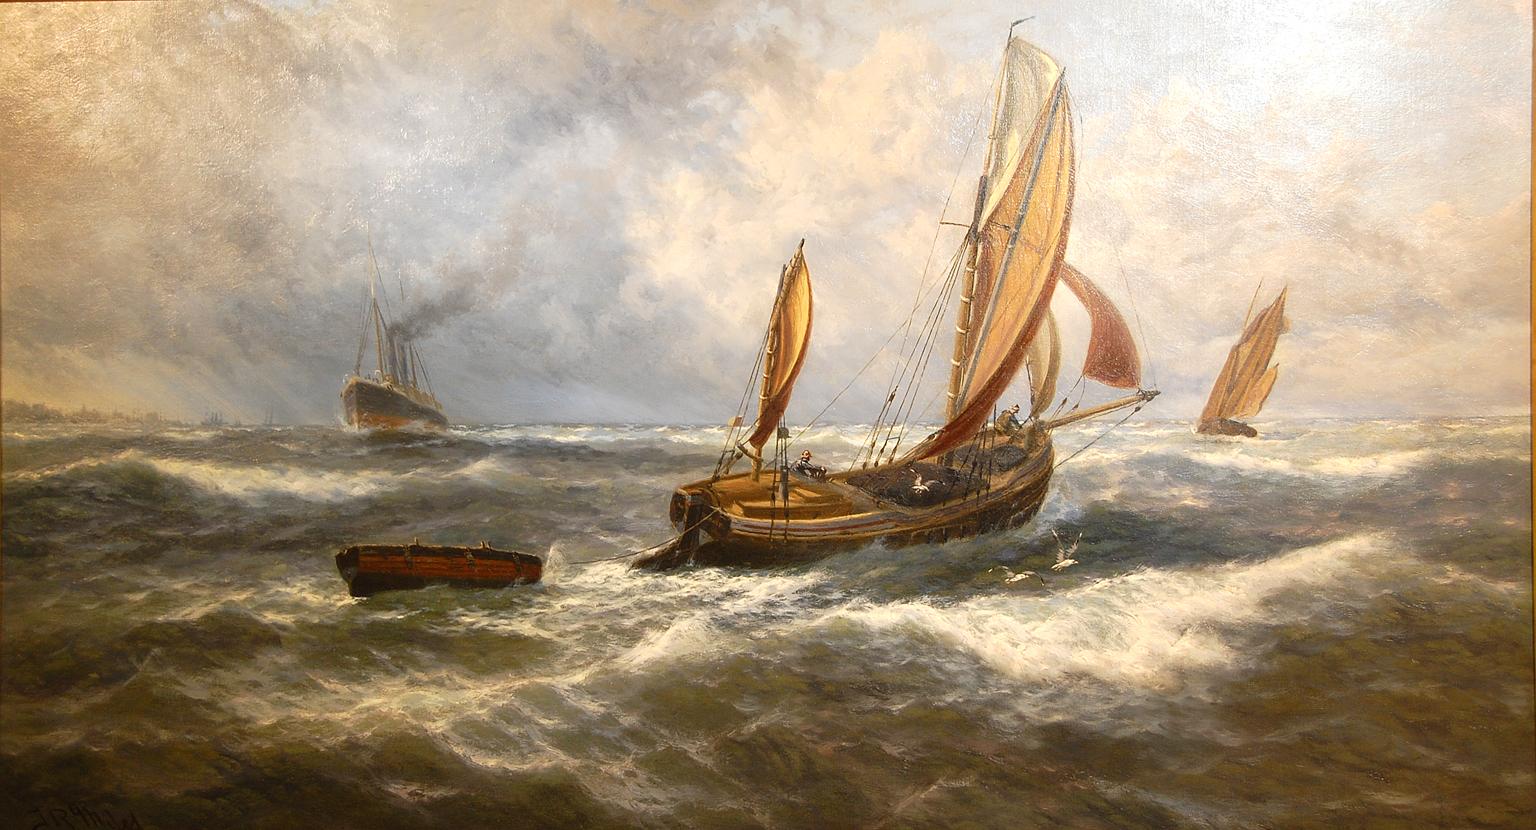 English Thomas Rose Miles original large marine oil painting on canvas, title inscribed verso 